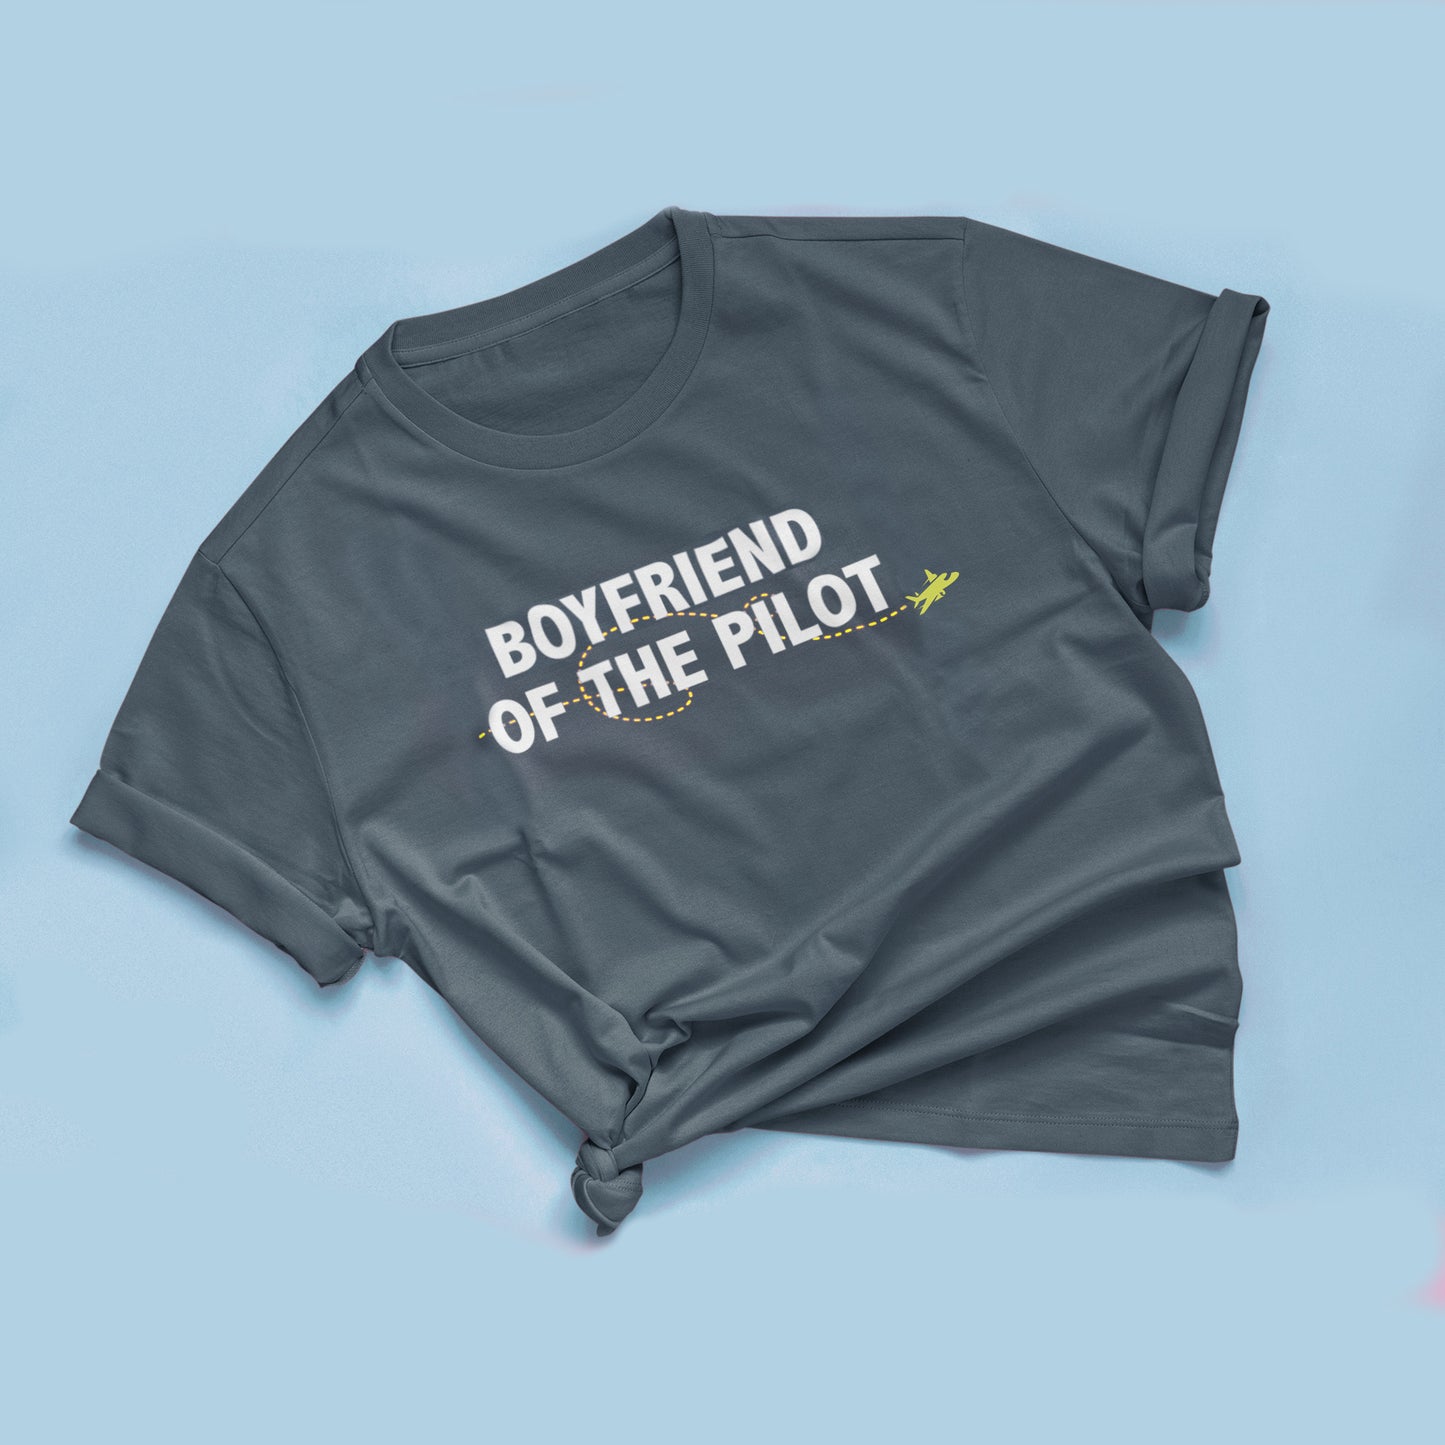 Brother of the/a Pilot - Youth T-shirt